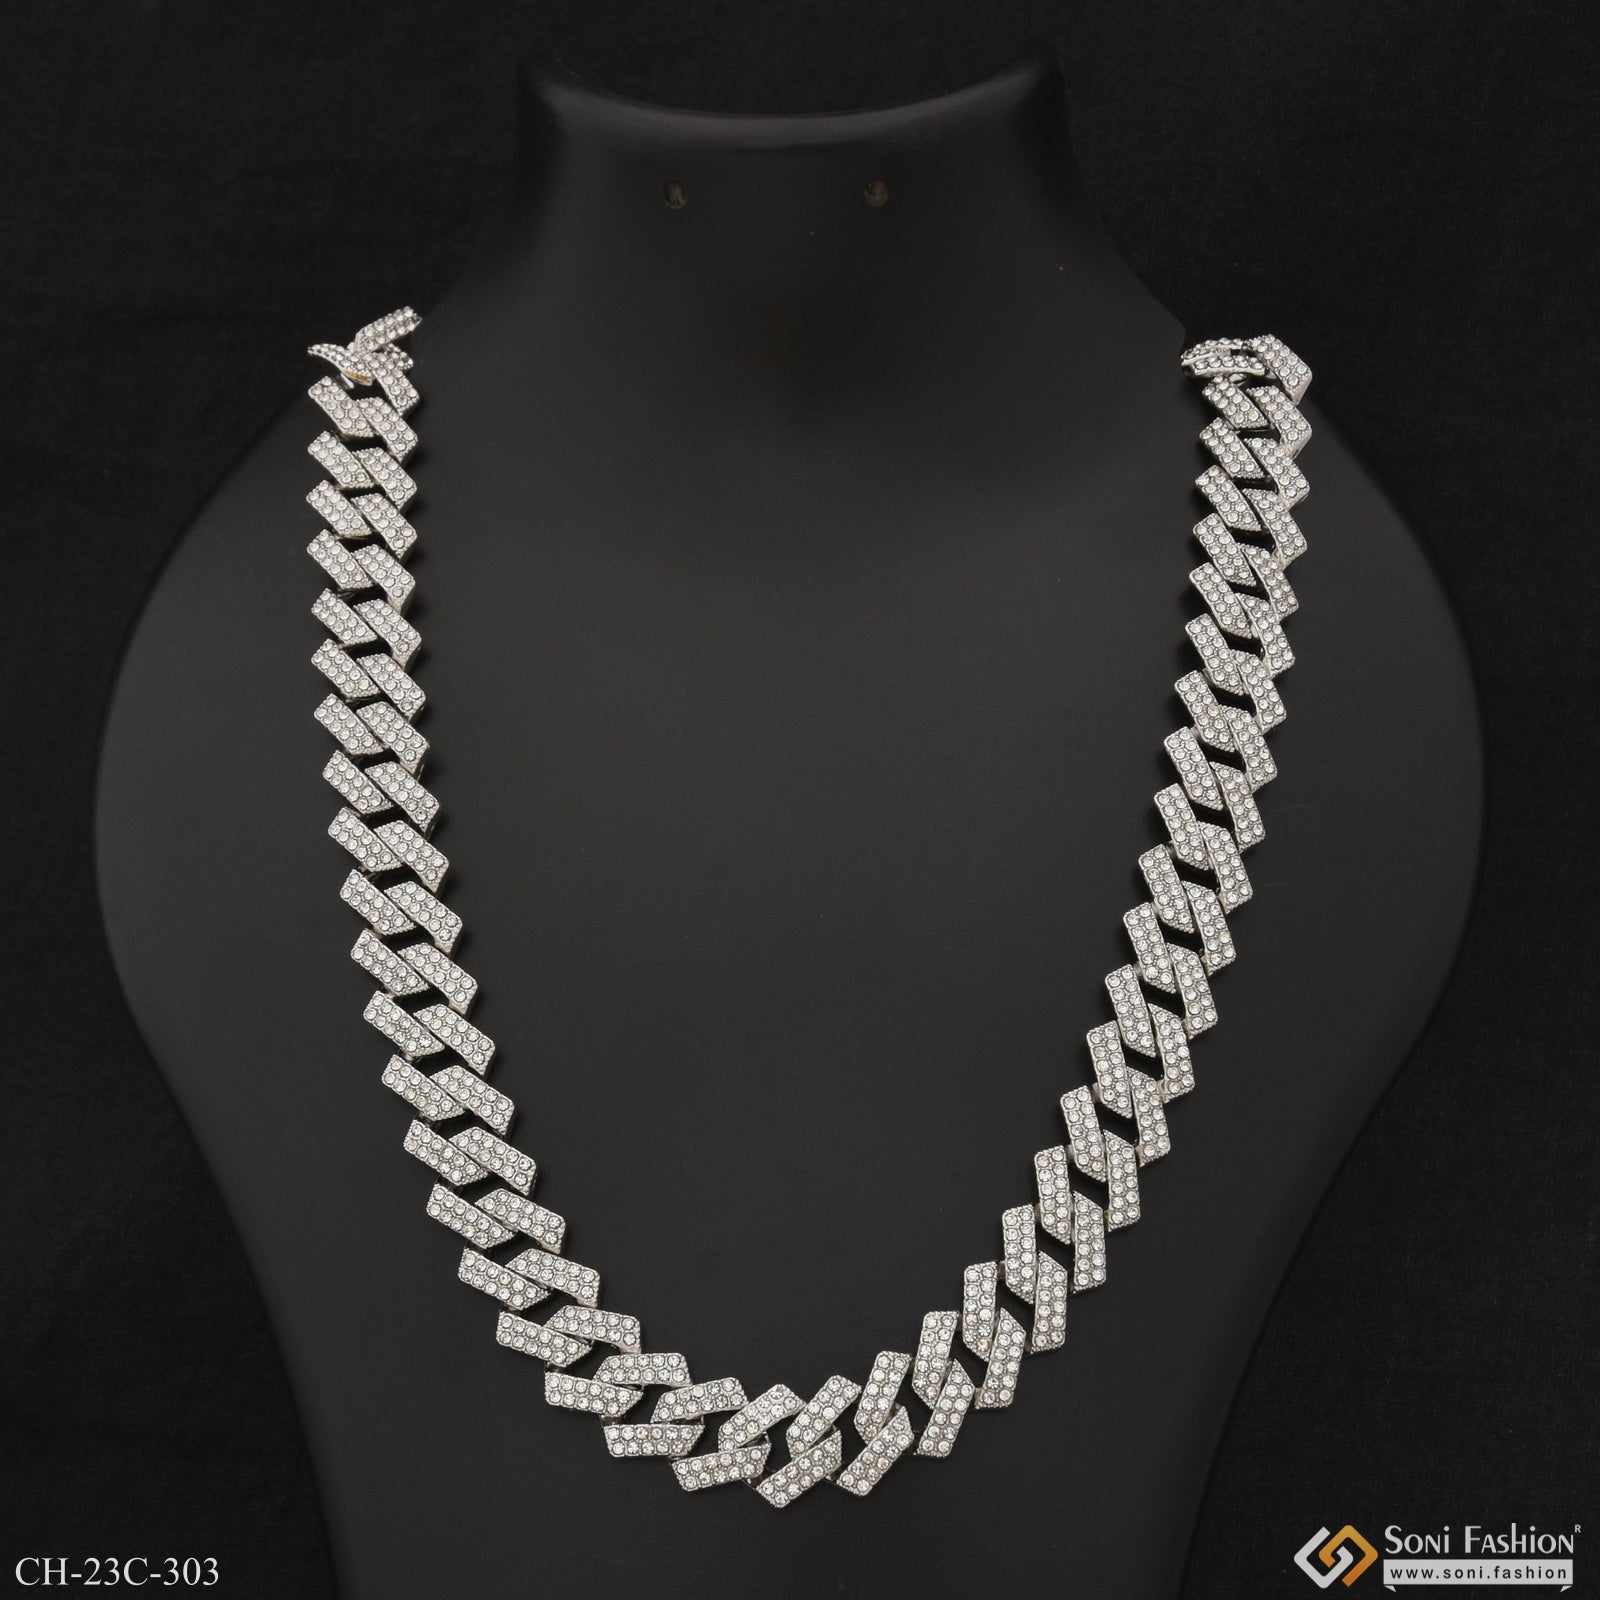 Glamorous Design with Diamond Fancy Design High-Quality Chain for Men - Style C303